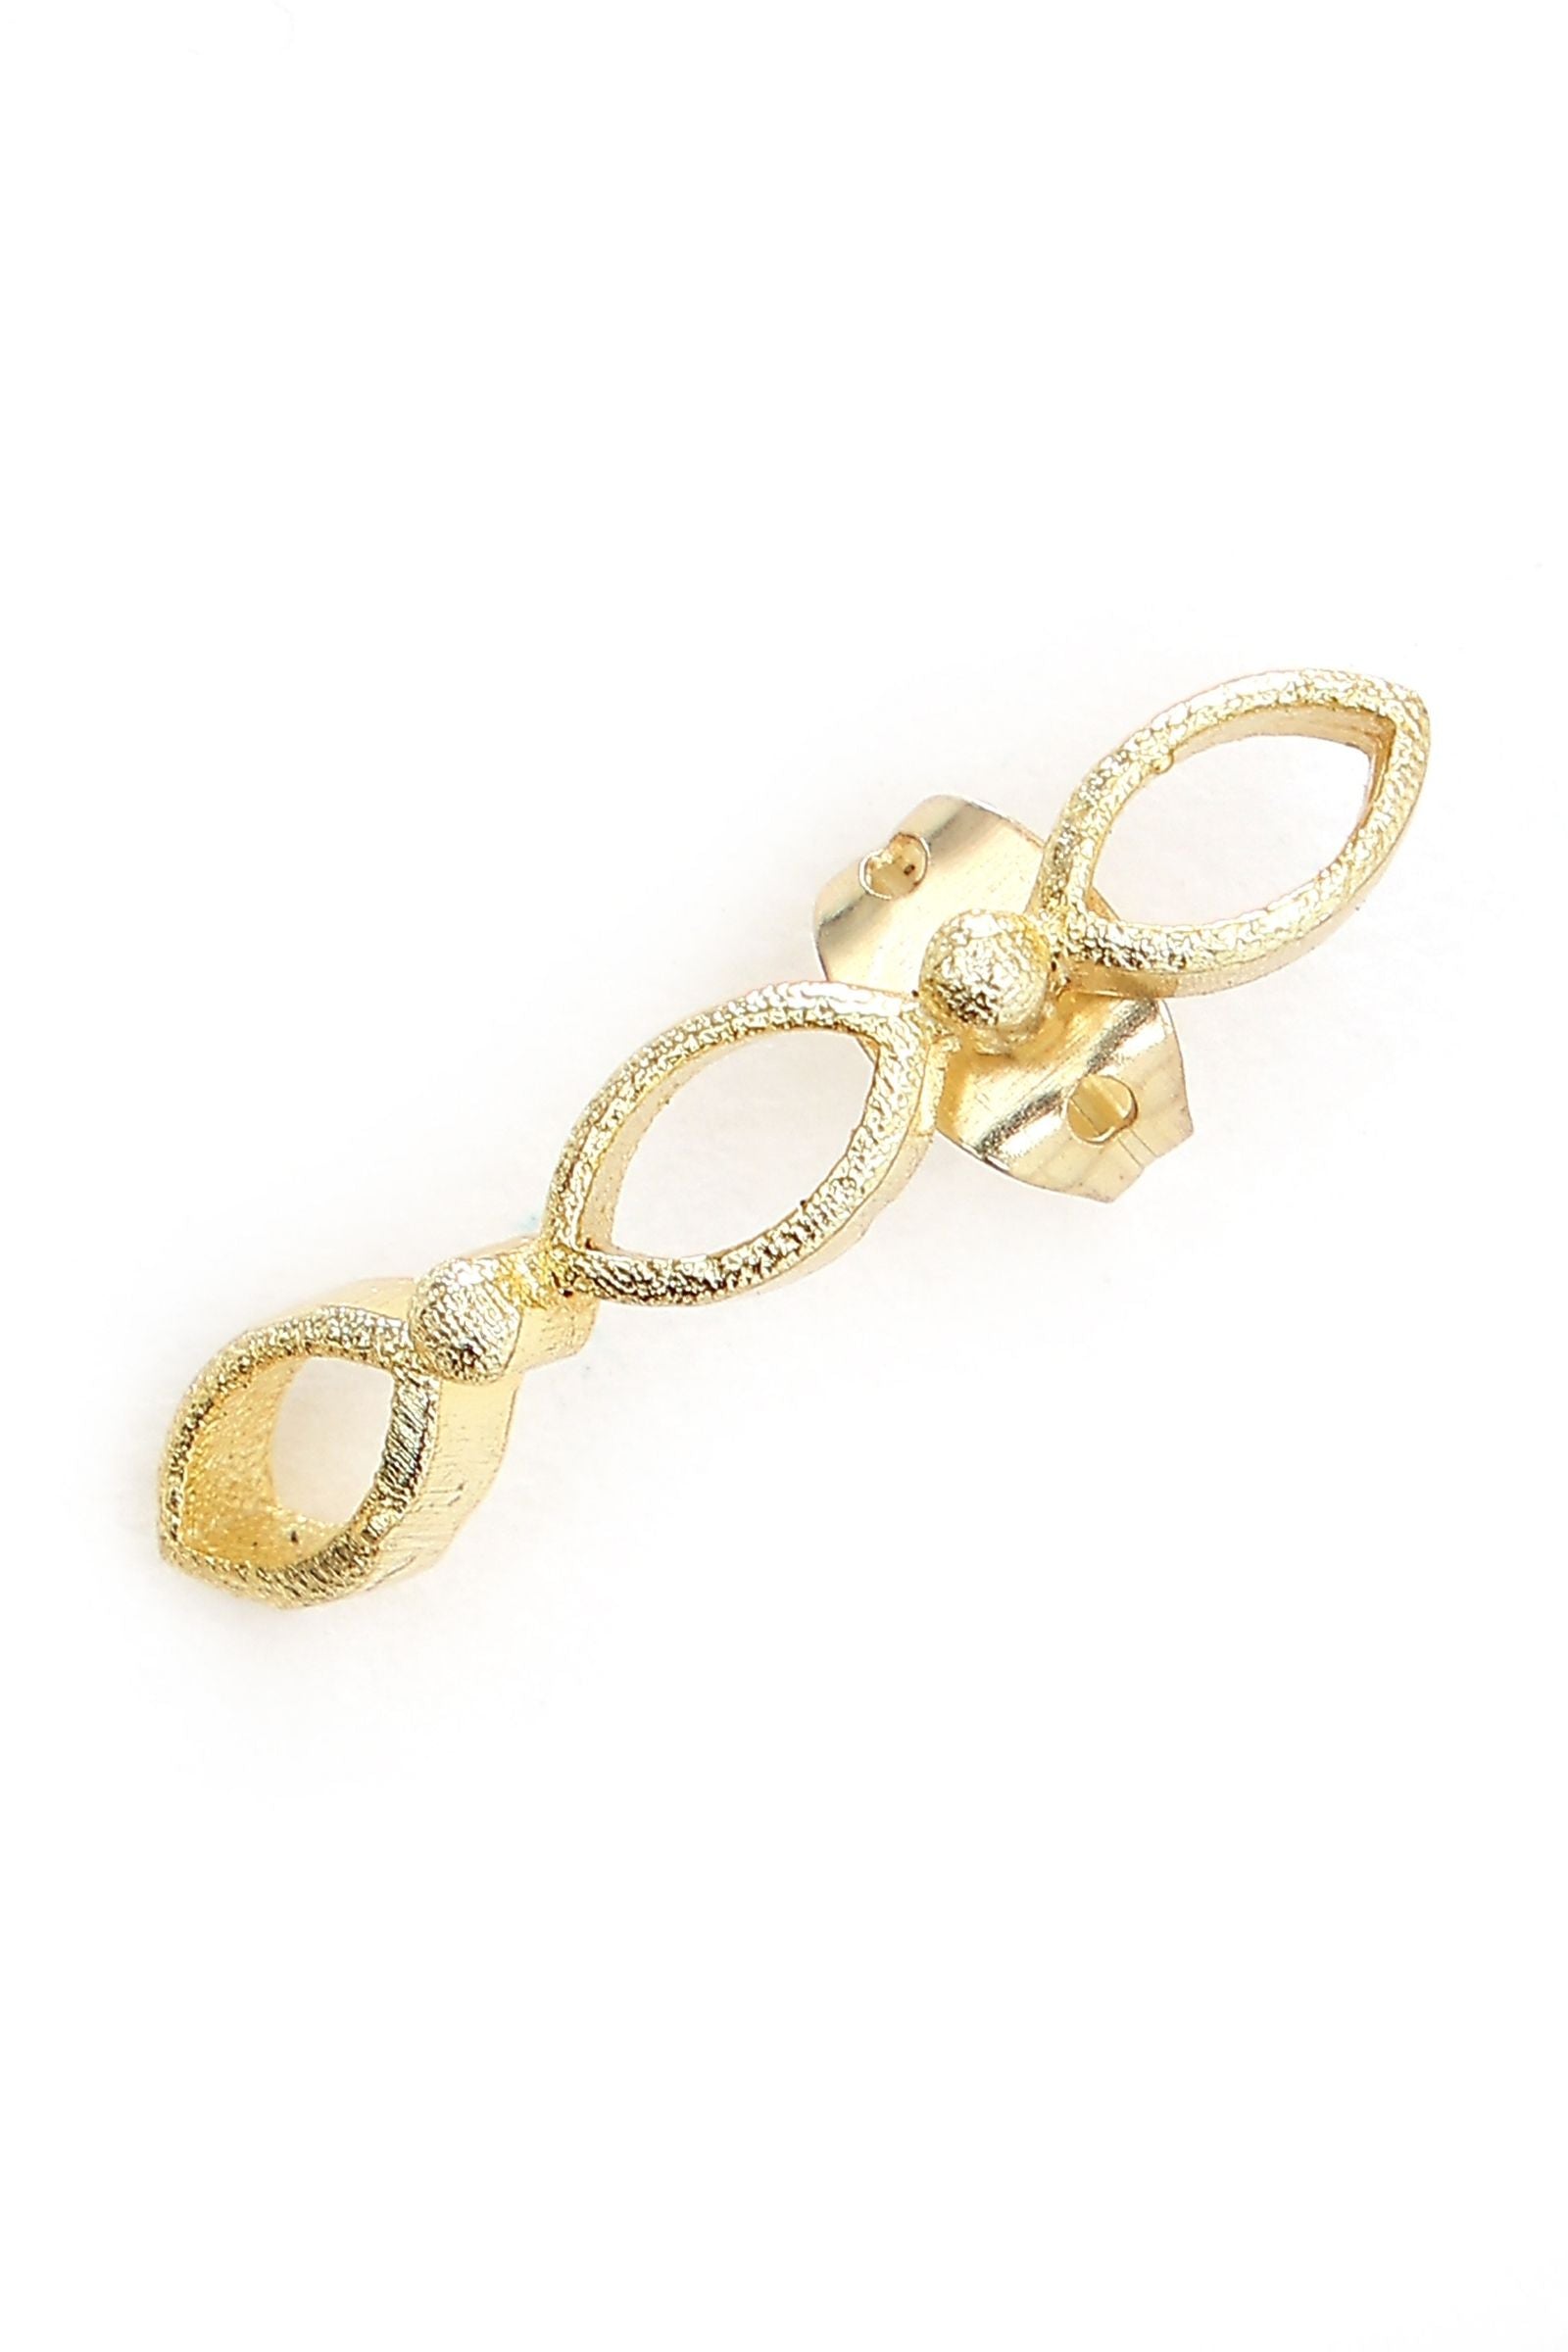 Gold Piacsso Climber Stud Earrings